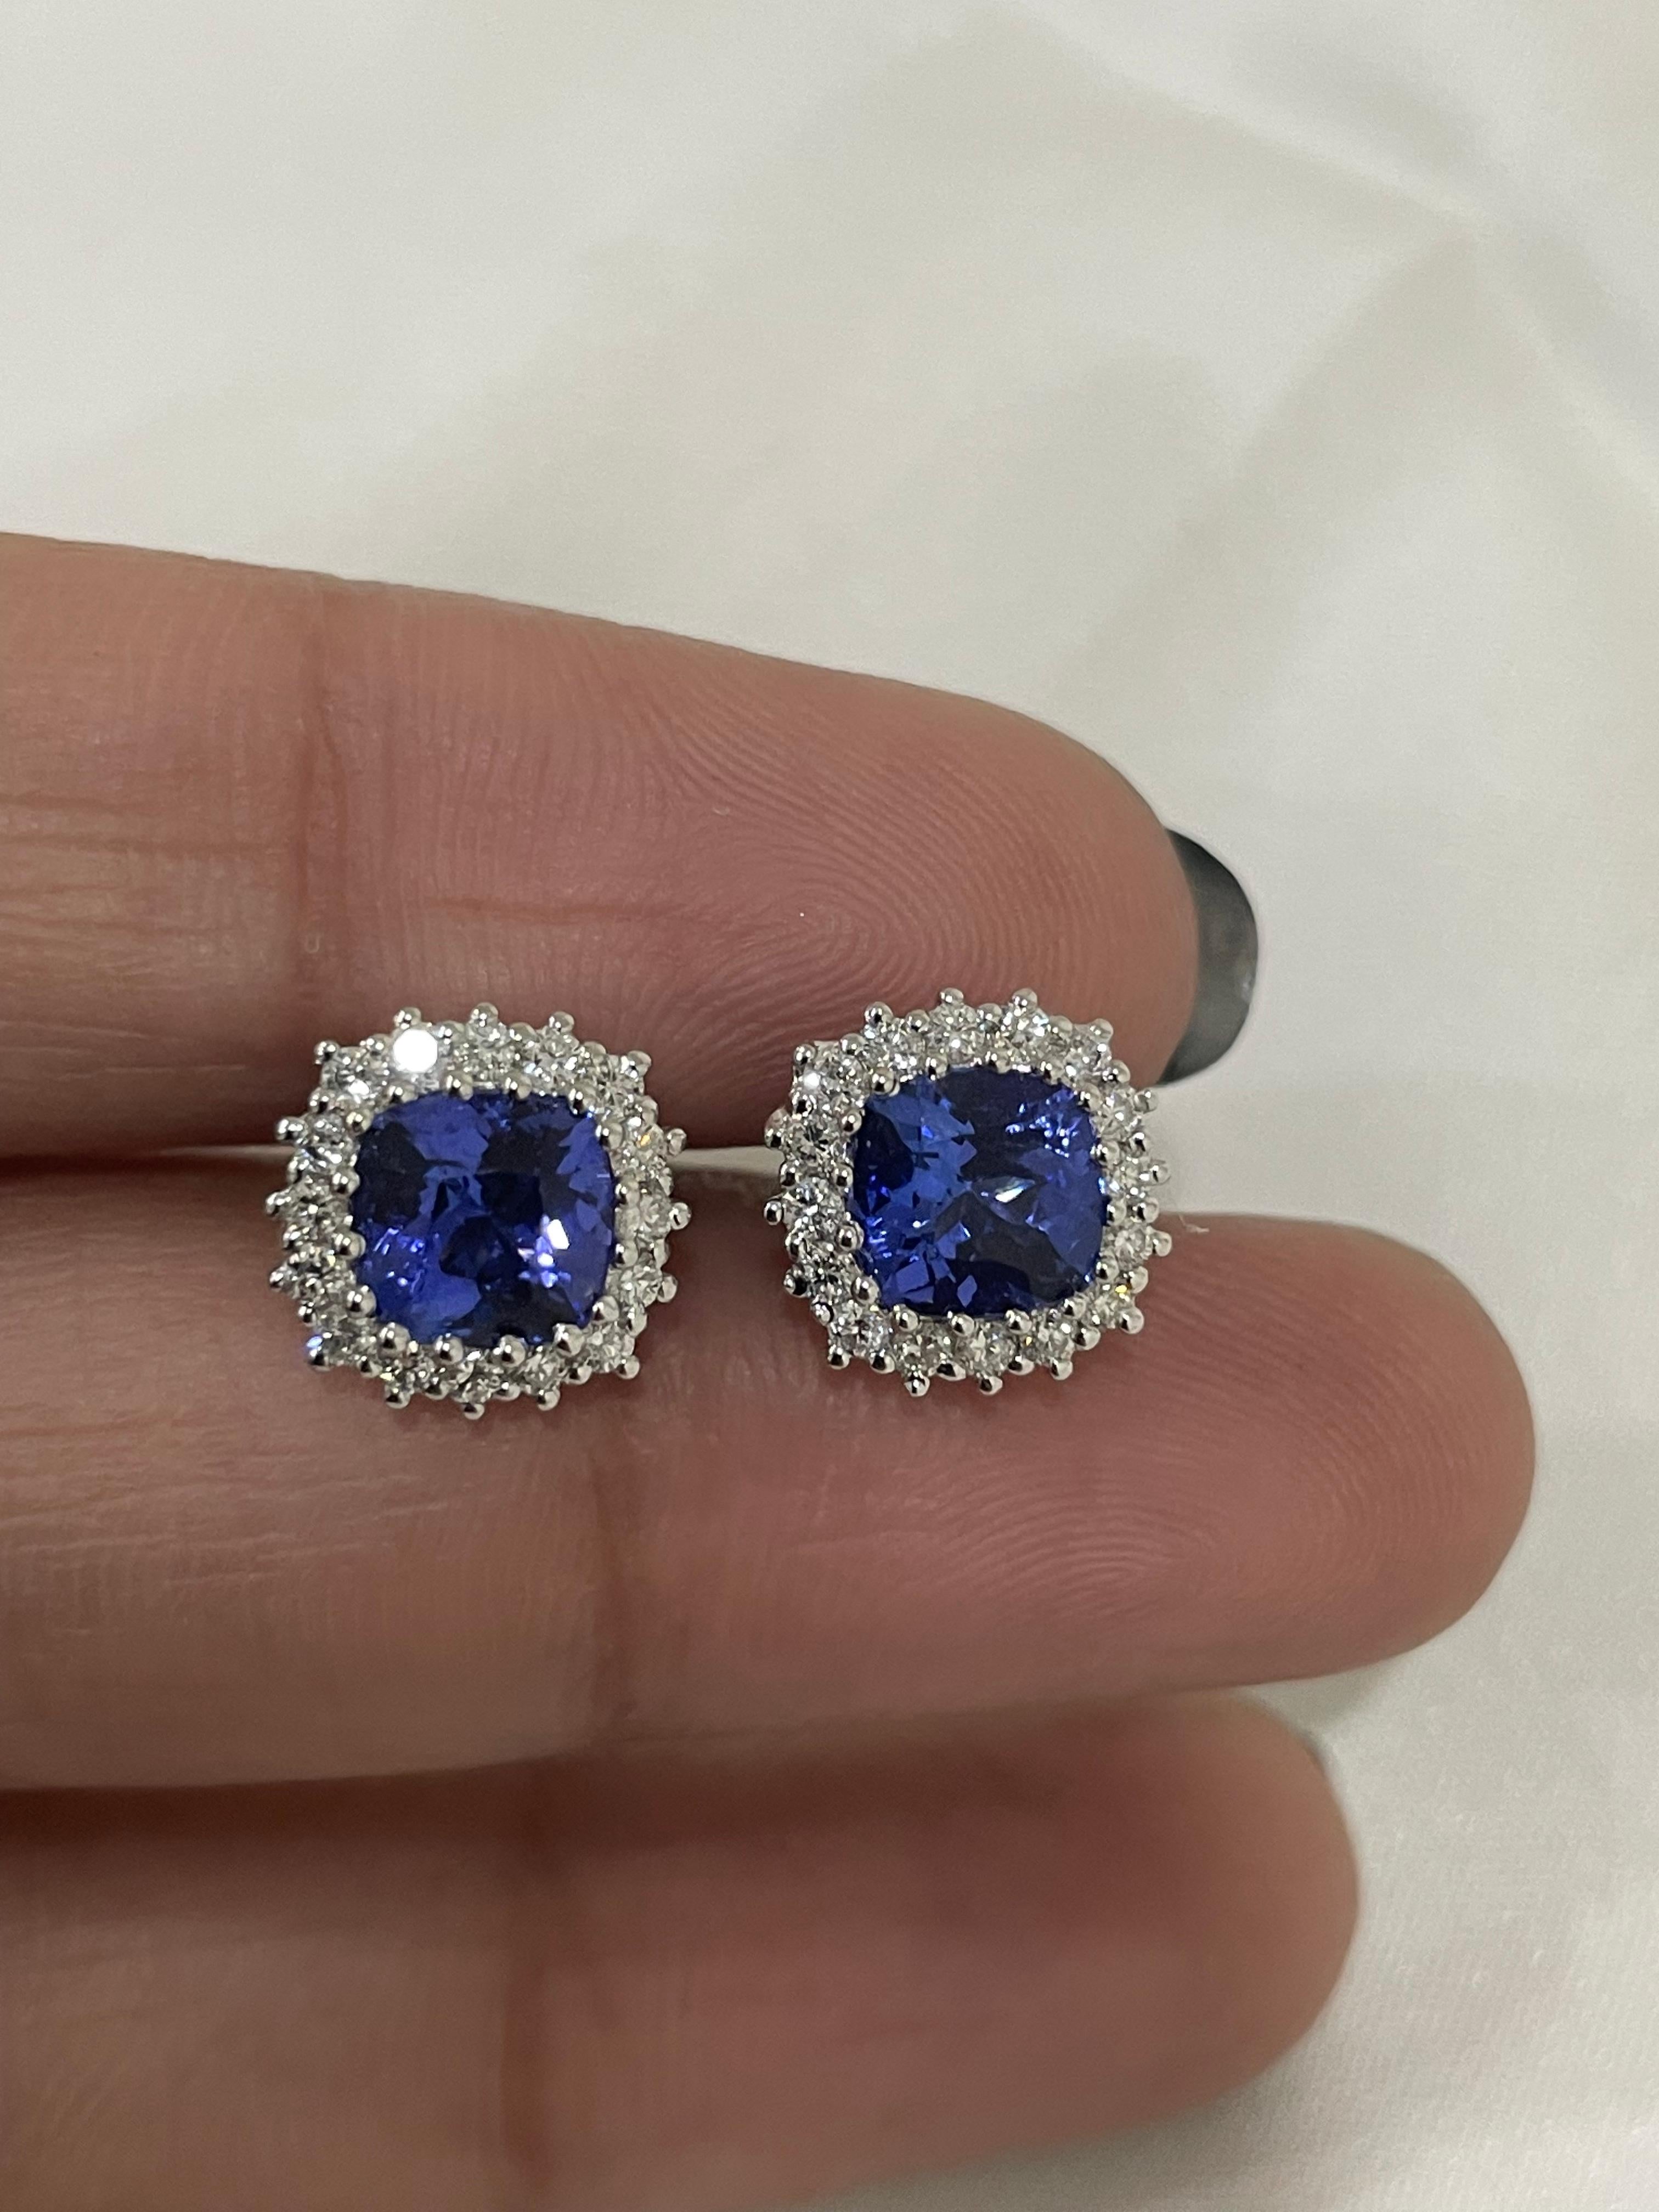 Studs create a subtle beauty while showcasing the colors of the natural precious gemstones and illuminating diamonds making a statement.

Cushion cut tanzanite studs with diamonds in 18K gold. Embrace your look with these stunning pair of earrings